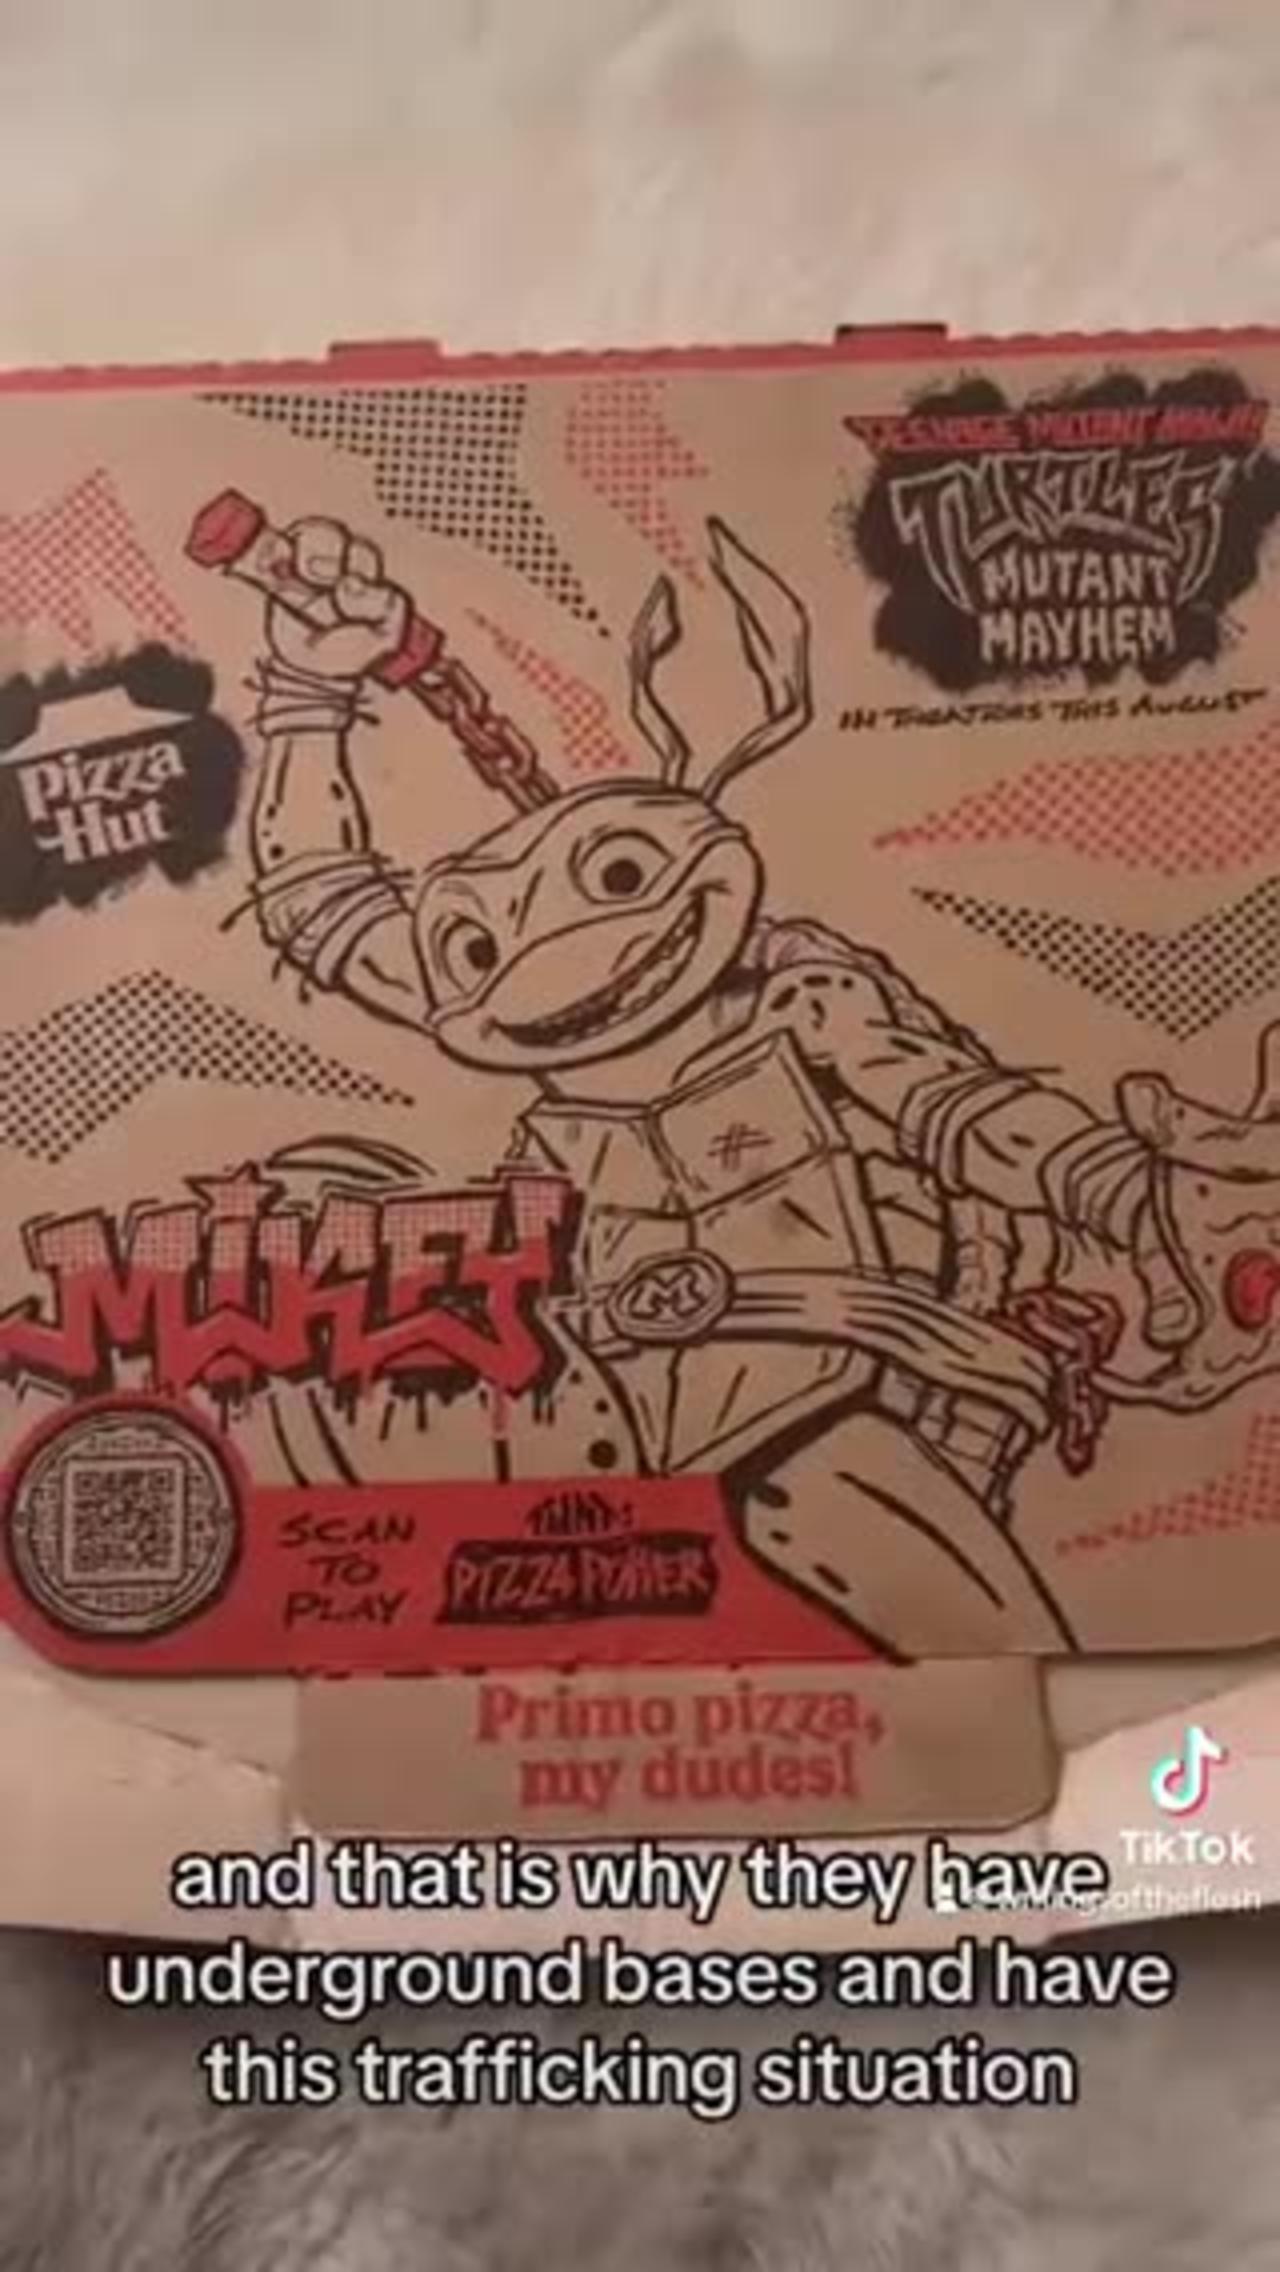 Pizza Hut is putting perverted satanic adrenochrome symbolism on their pizza boxes